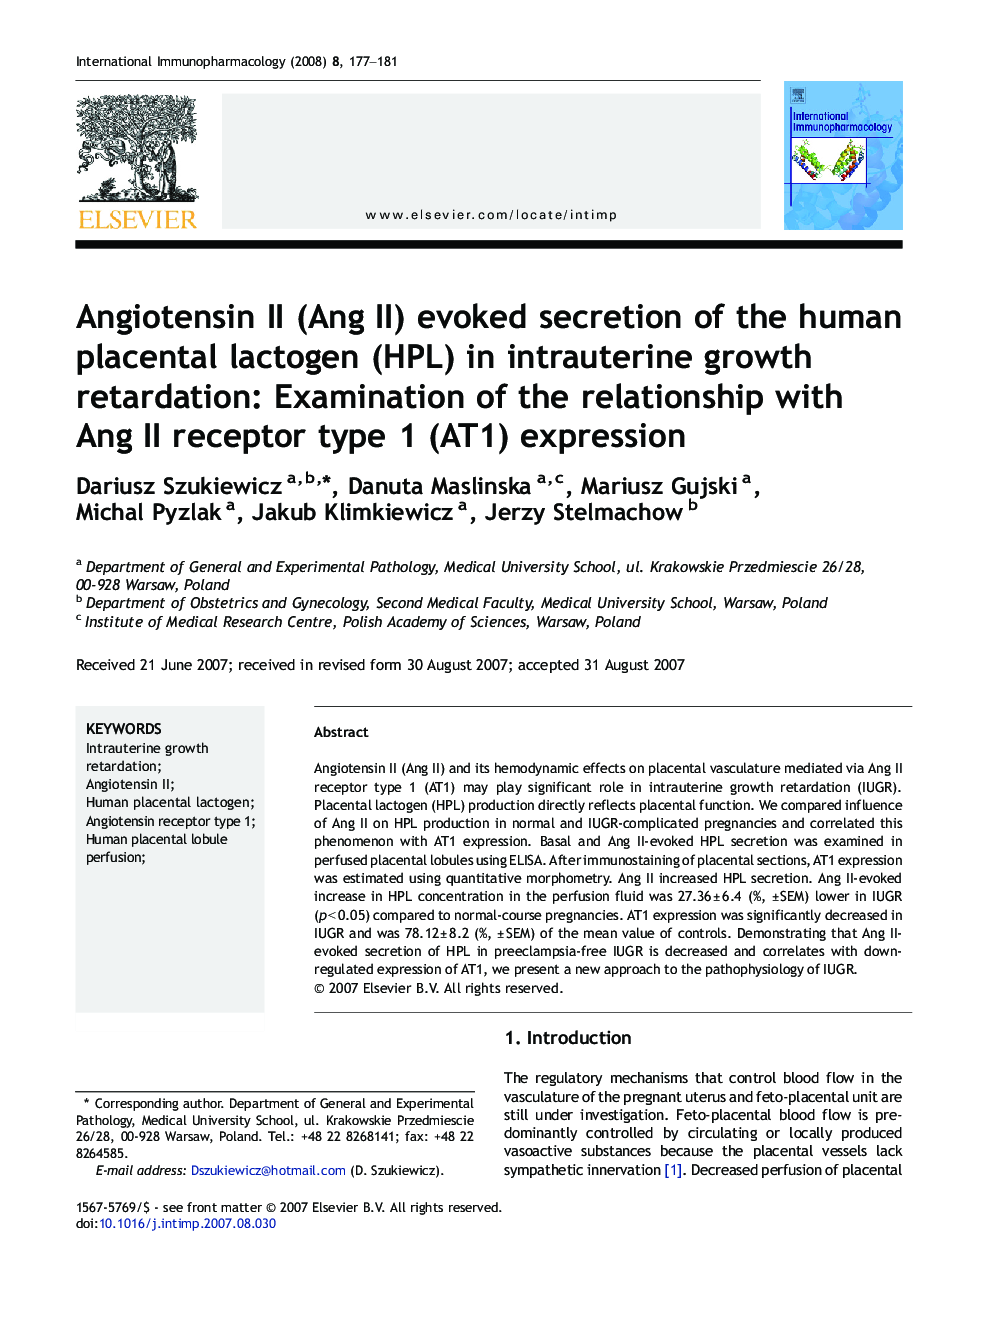 Angiotensin II (Ang II) evoked secretion of the human placental lactogen (HPL) in intrauterine growth retardation: Examination of the relationship with Ang II receptor type 1 (AT1) expression